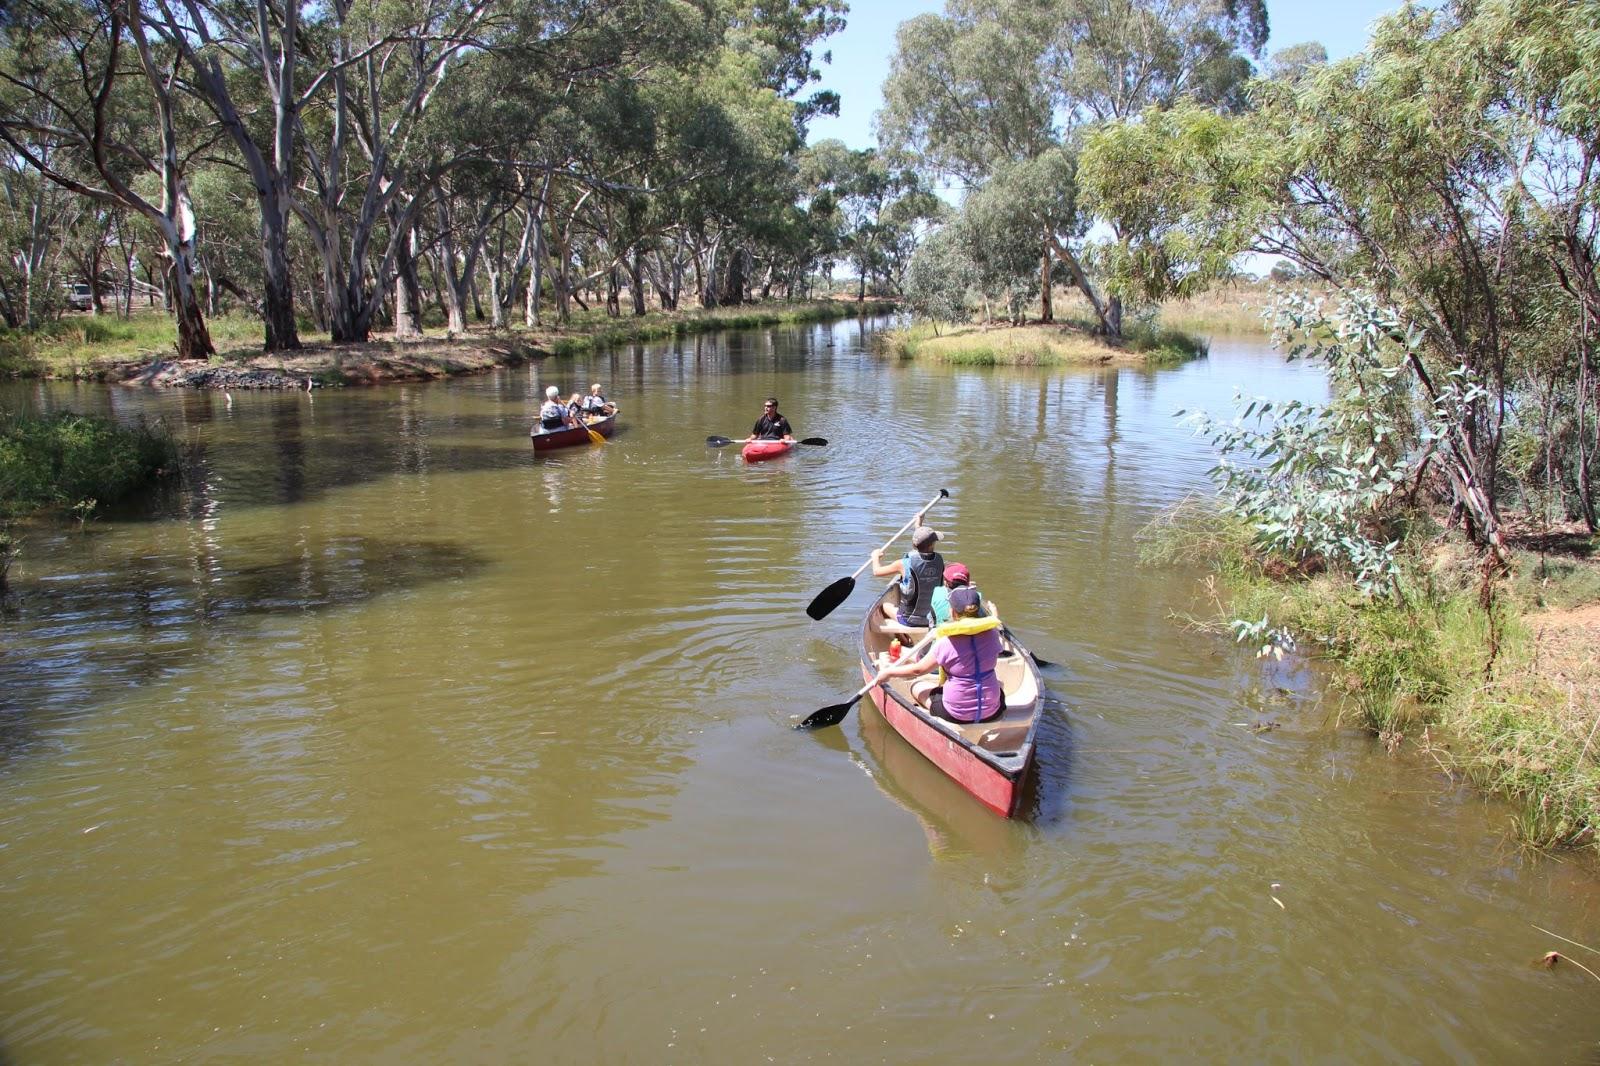 Families can explore the natural beauty of Bland Shire on the weekends